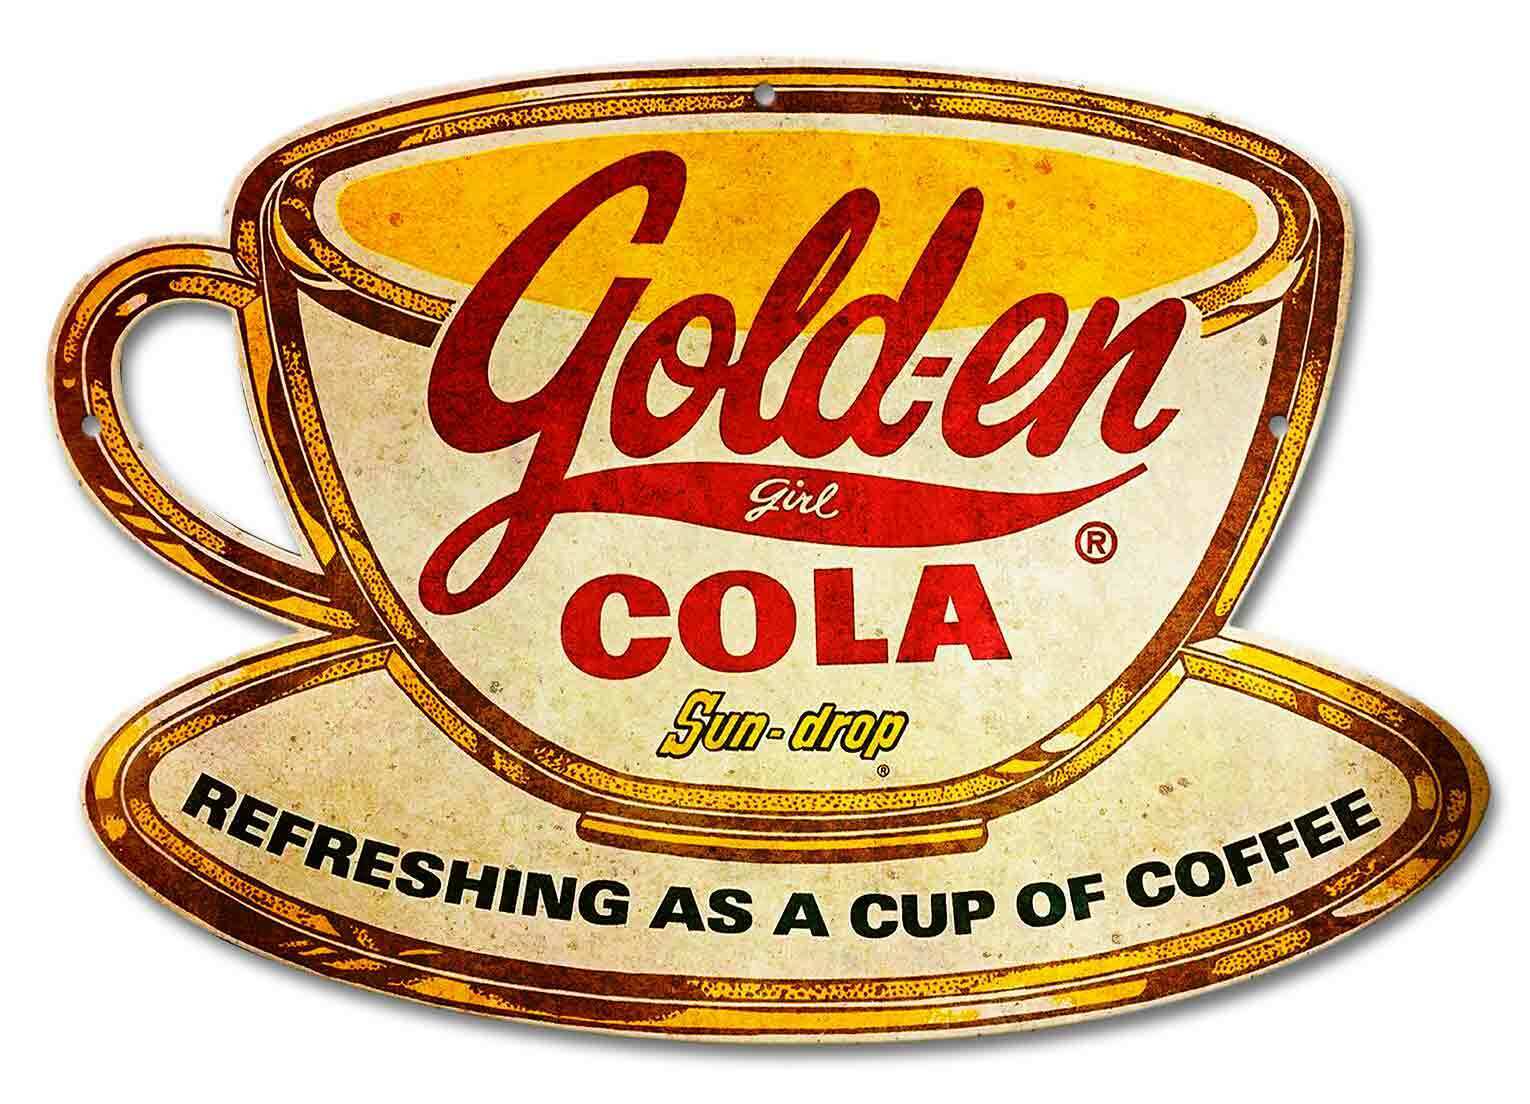 GOLDEN GIRL COLA SUNDROP CUP & SAUCER HEAVY DUTY USA MADE METAL ADVERTISING SIGN